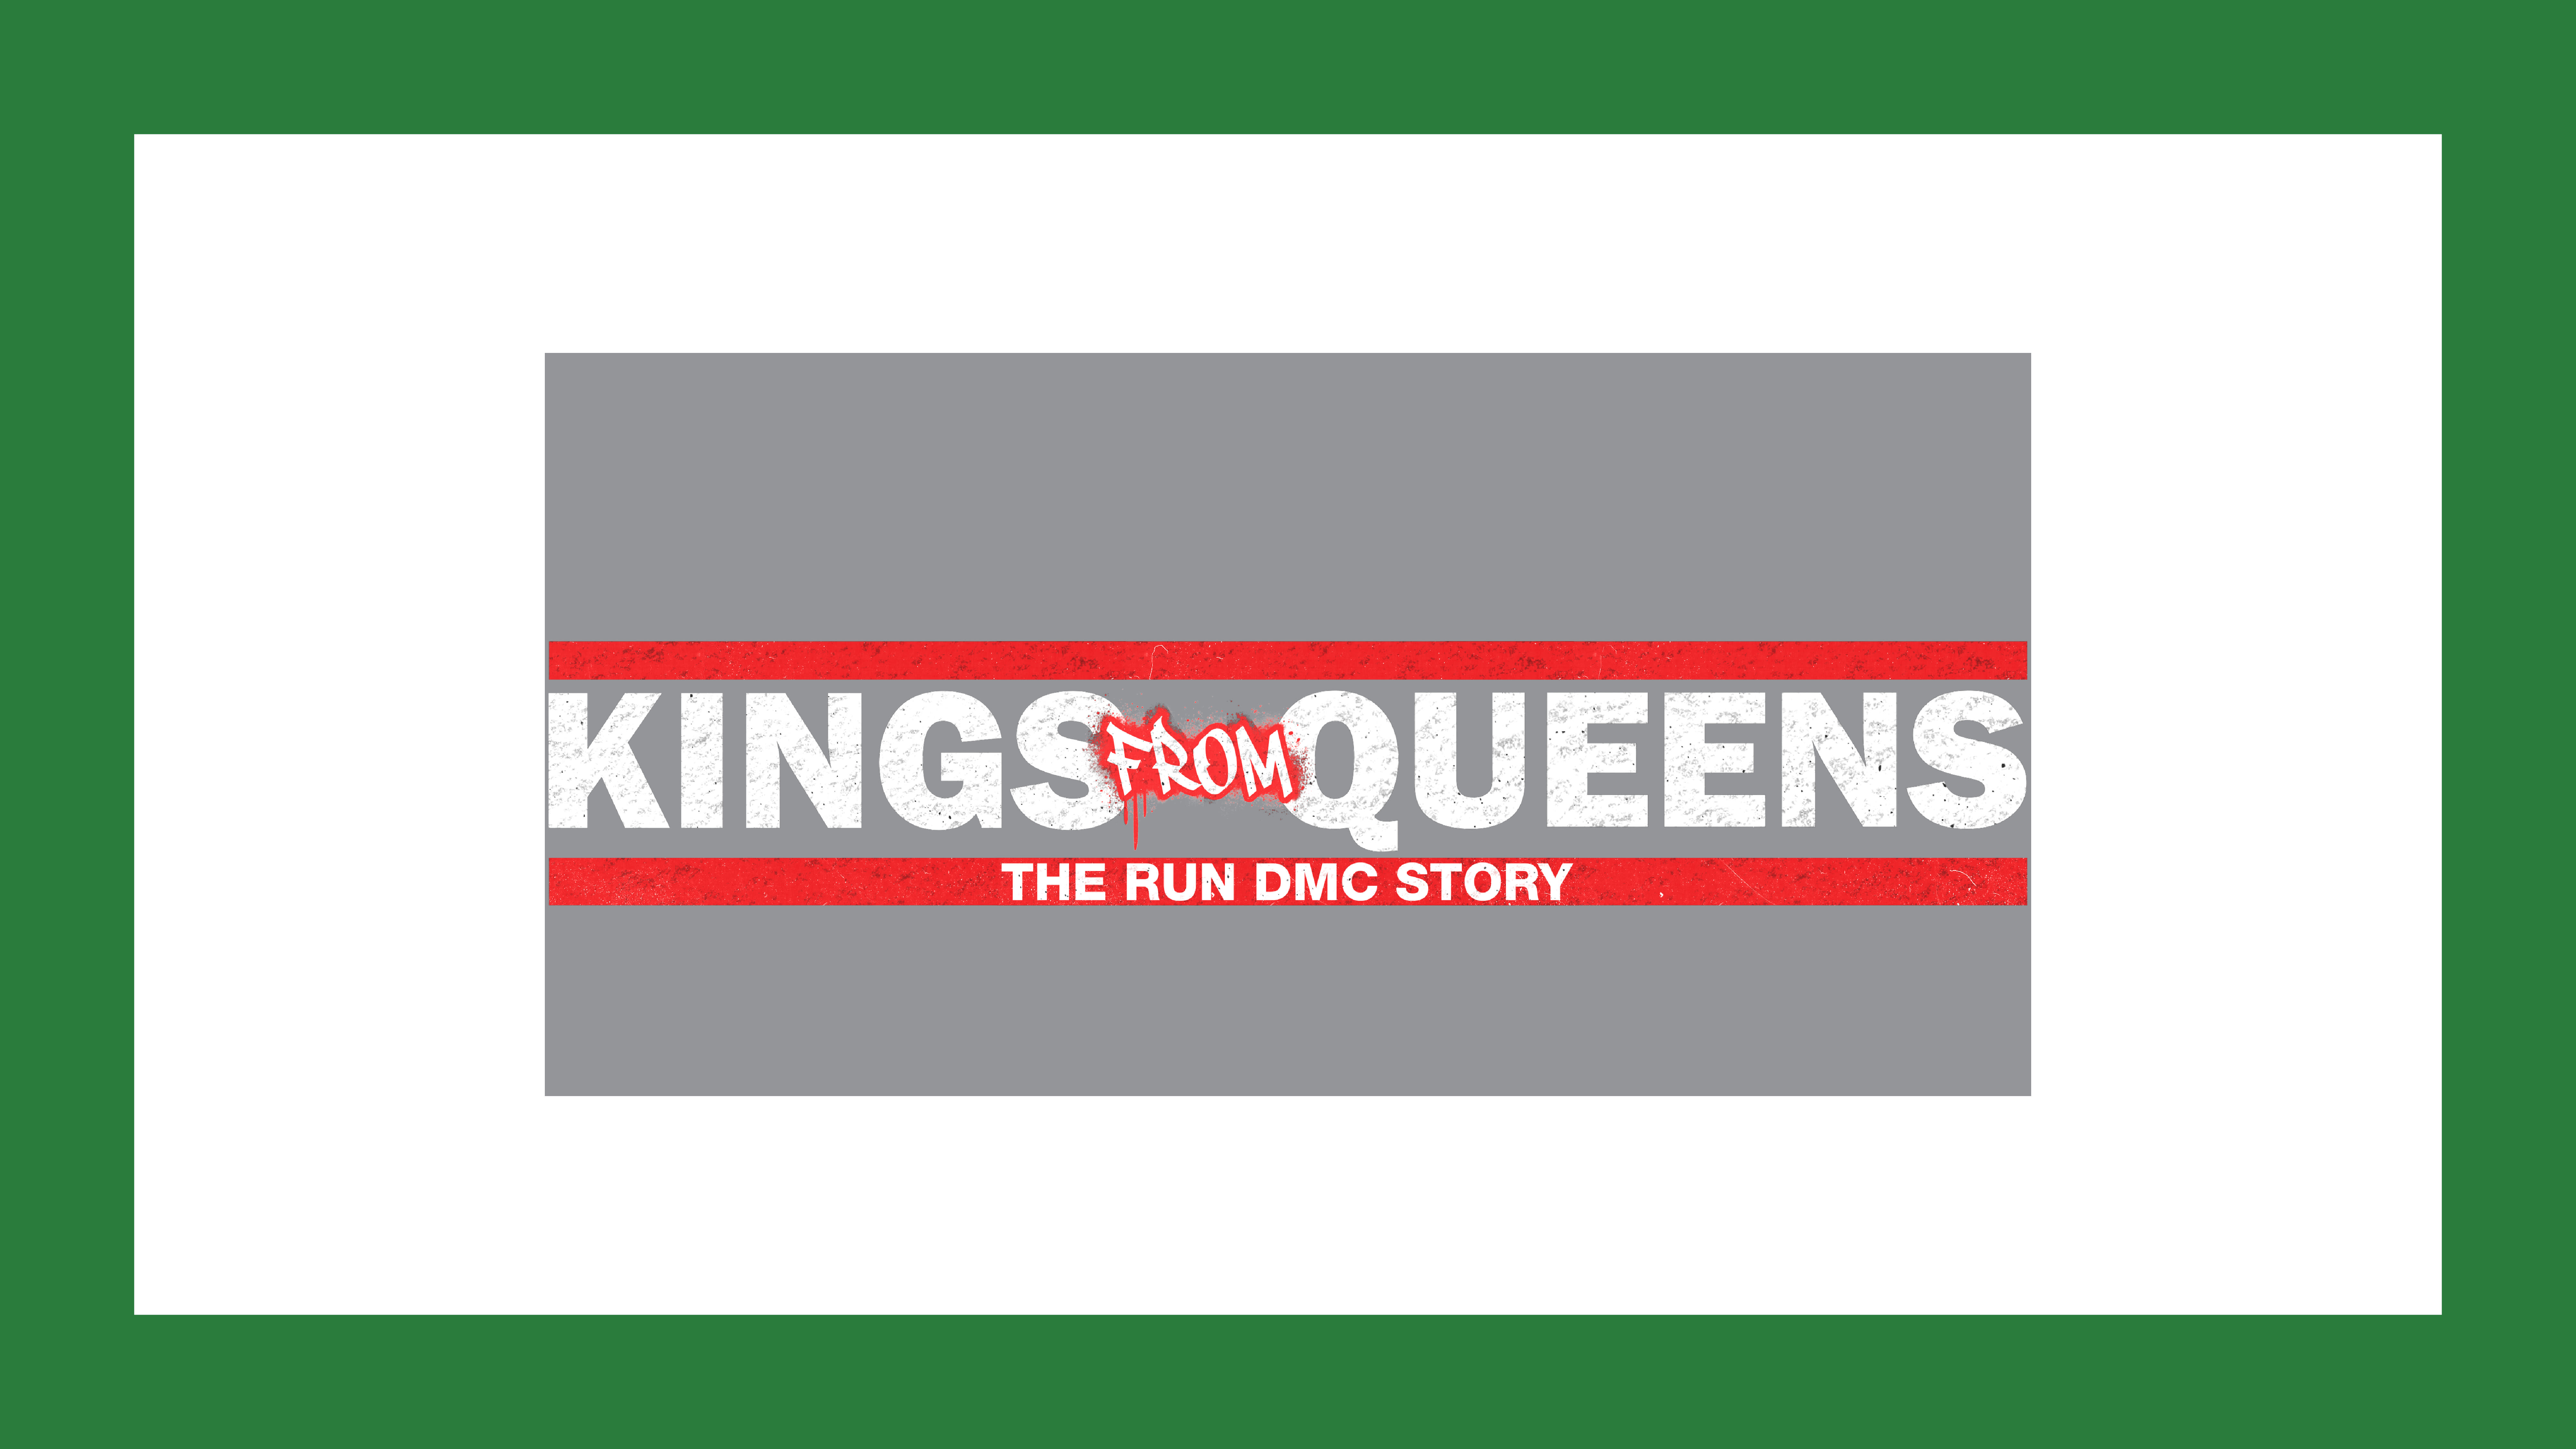 ‘Kings From Queens: The Story Of Run DMC’ Shows How Hip Hop Pioneers “Changed Pop, Changed Fashion, Changed Music...